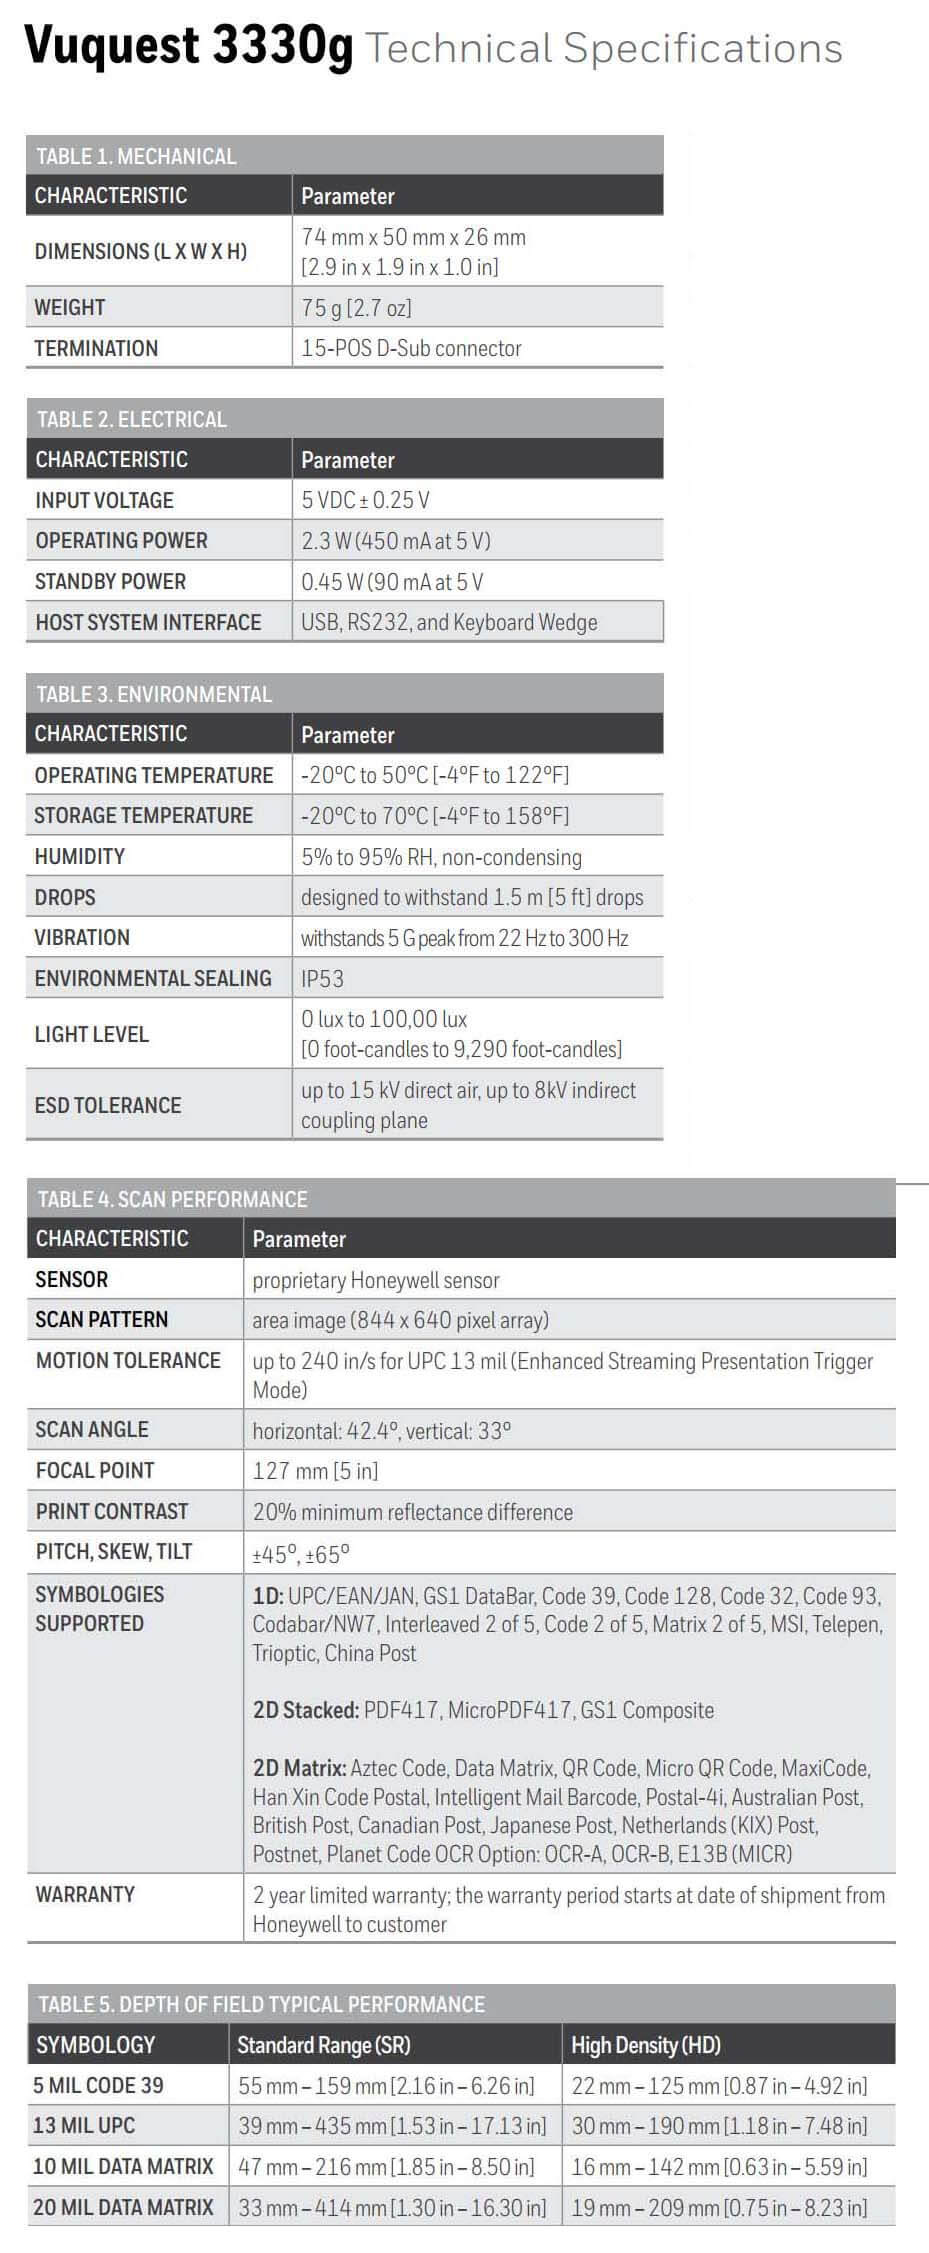 Honeywell Vuquest 3330g Technical Specifications